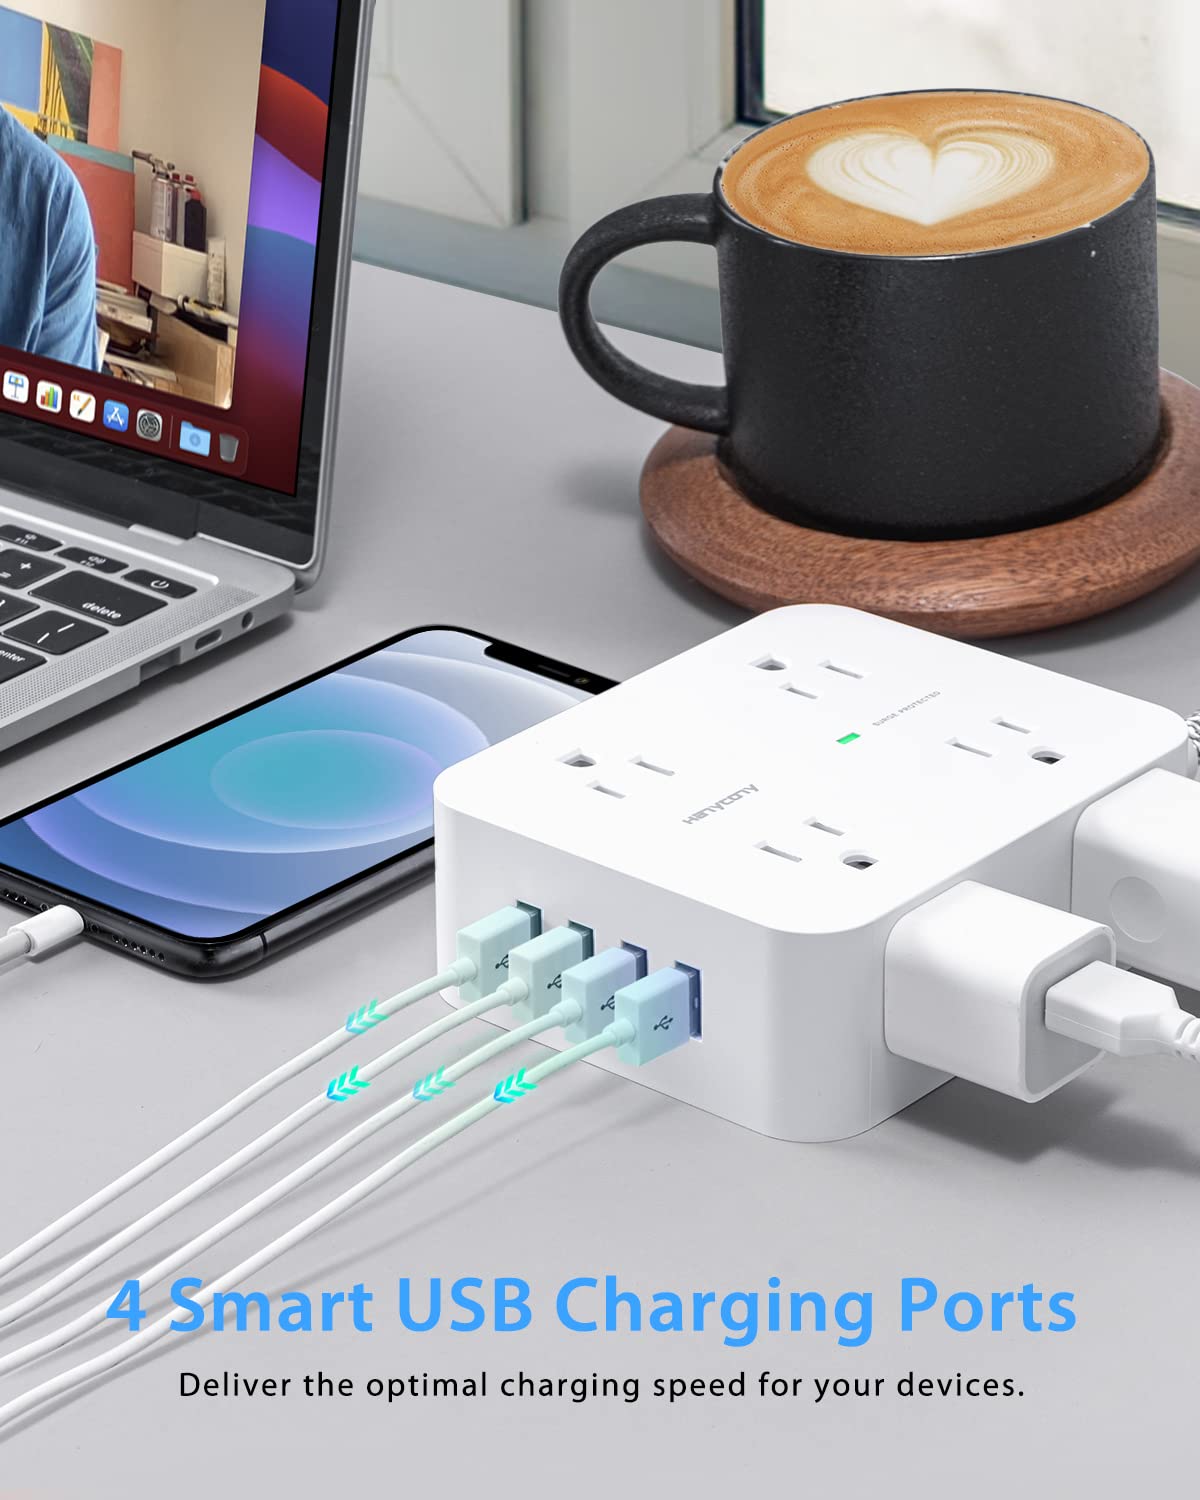 Surge Protector Power Strip - Extension Cord with 8 Widely Outlets 4 USB Ports, 3 Side Multi Plug Outlet Extender, Flat Plug, 5Ft, Wall Mount, Desk USB Charging Station for Home Office Dorm Room ETL